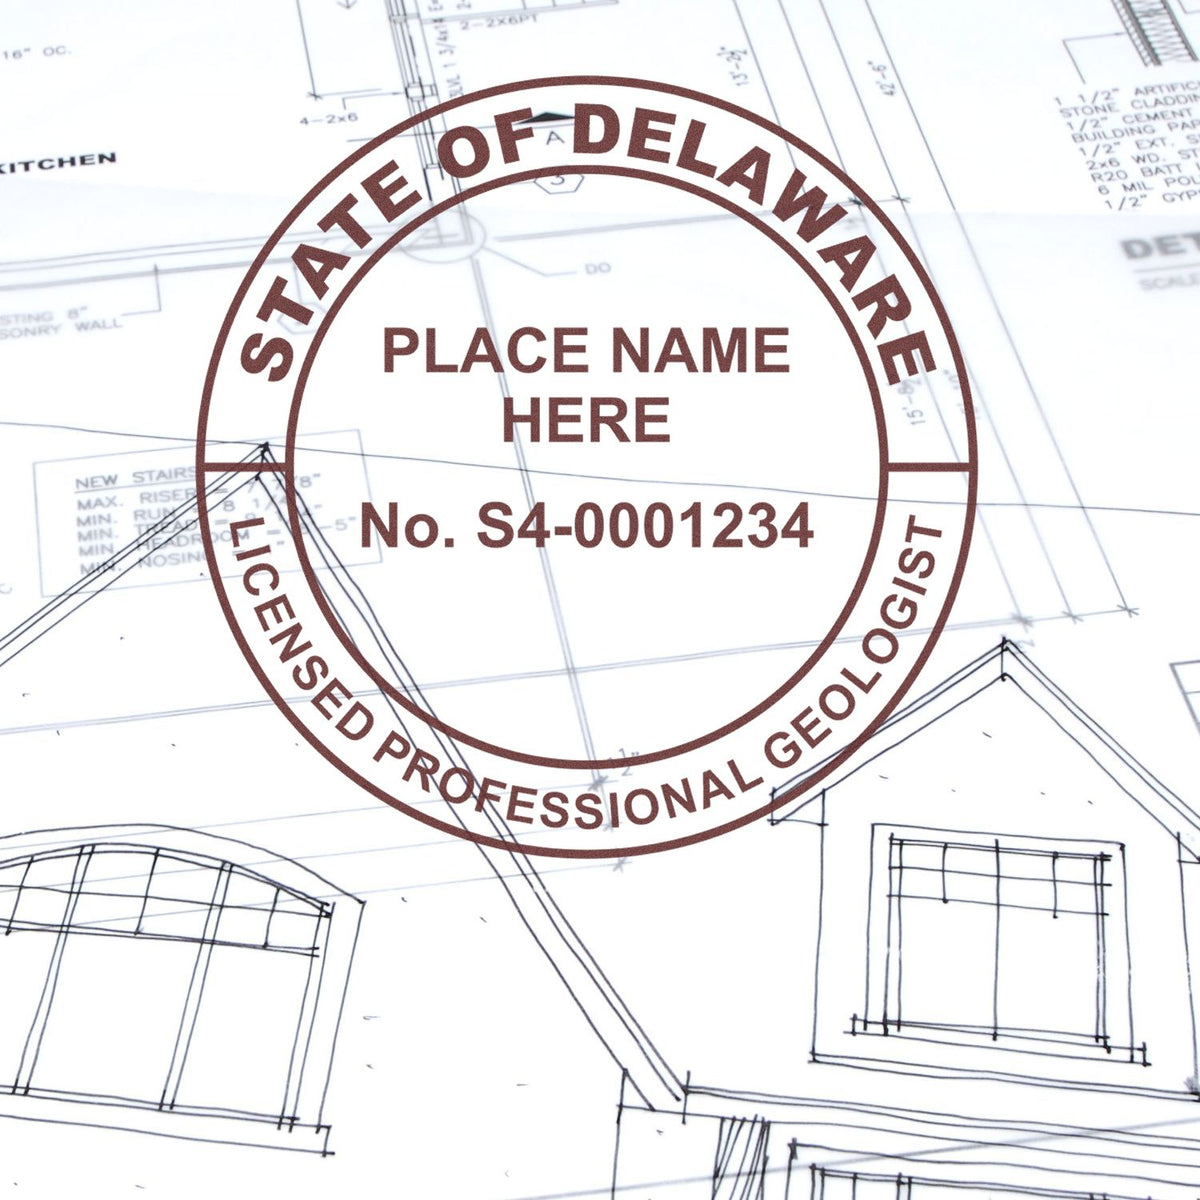 The Self-Inking Delaware Geologist Stamp stamp impression comes to life with a crisp, detailed image stamped on paper - showcasing true professional quality.